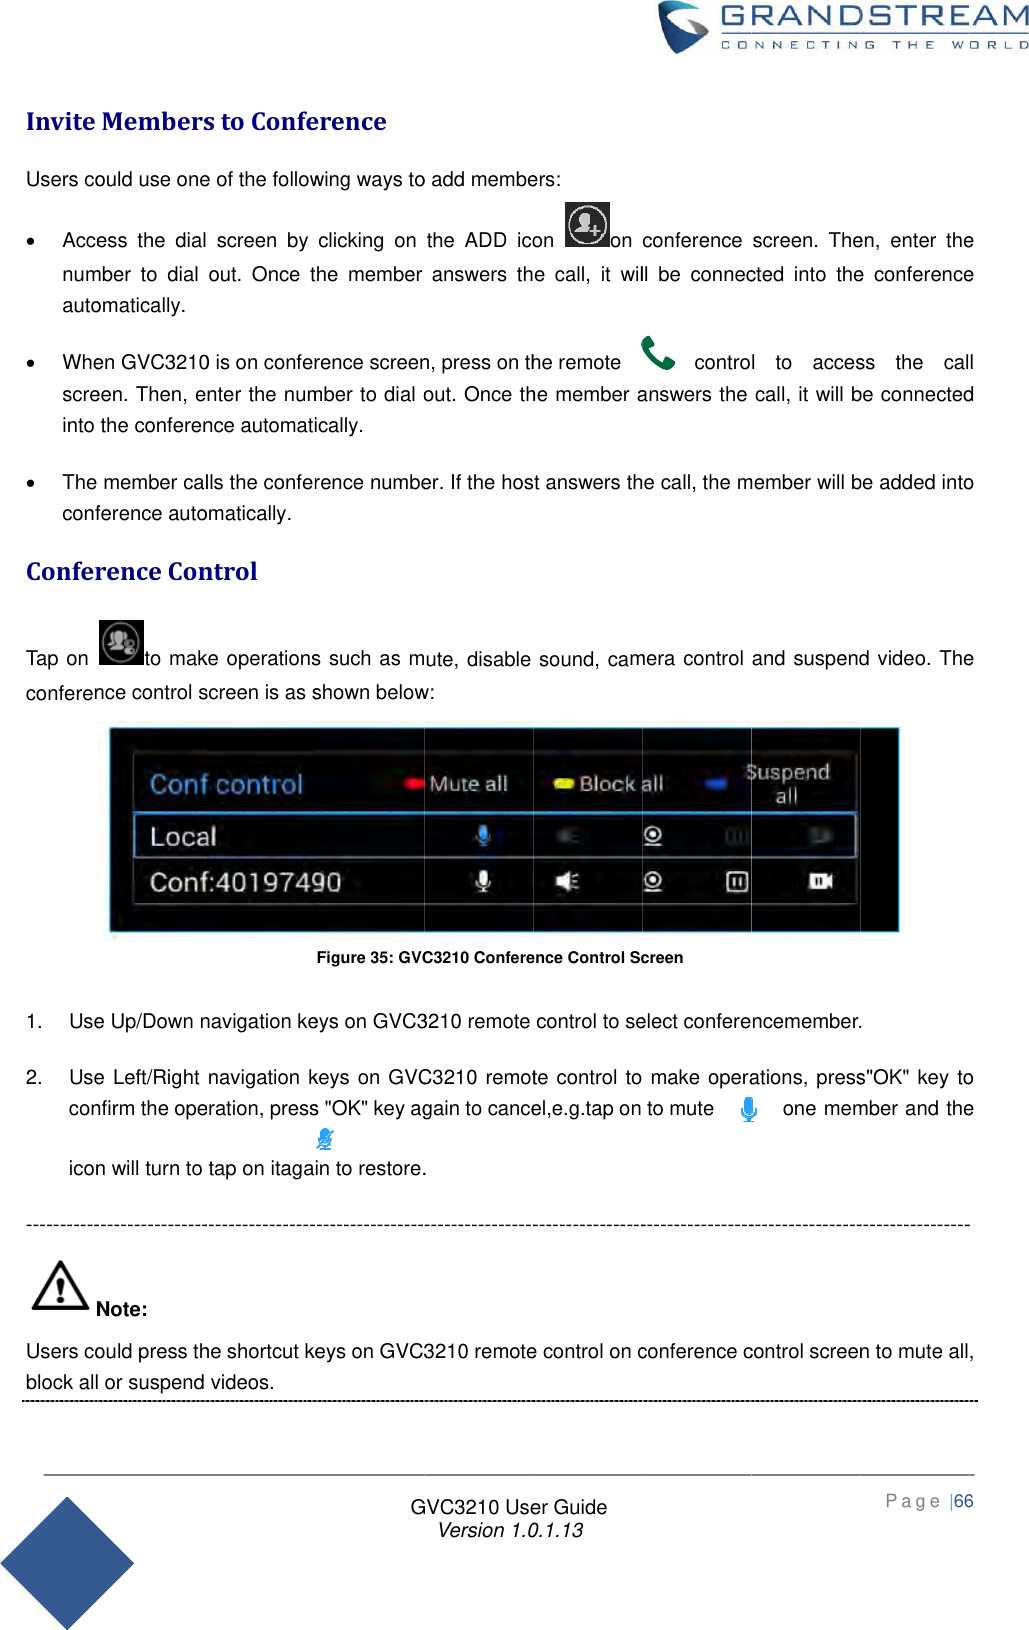 Page 66 of Grandstream Networks GVC3210RMT Bluetooth Remote Control User Manual   NEW 1213